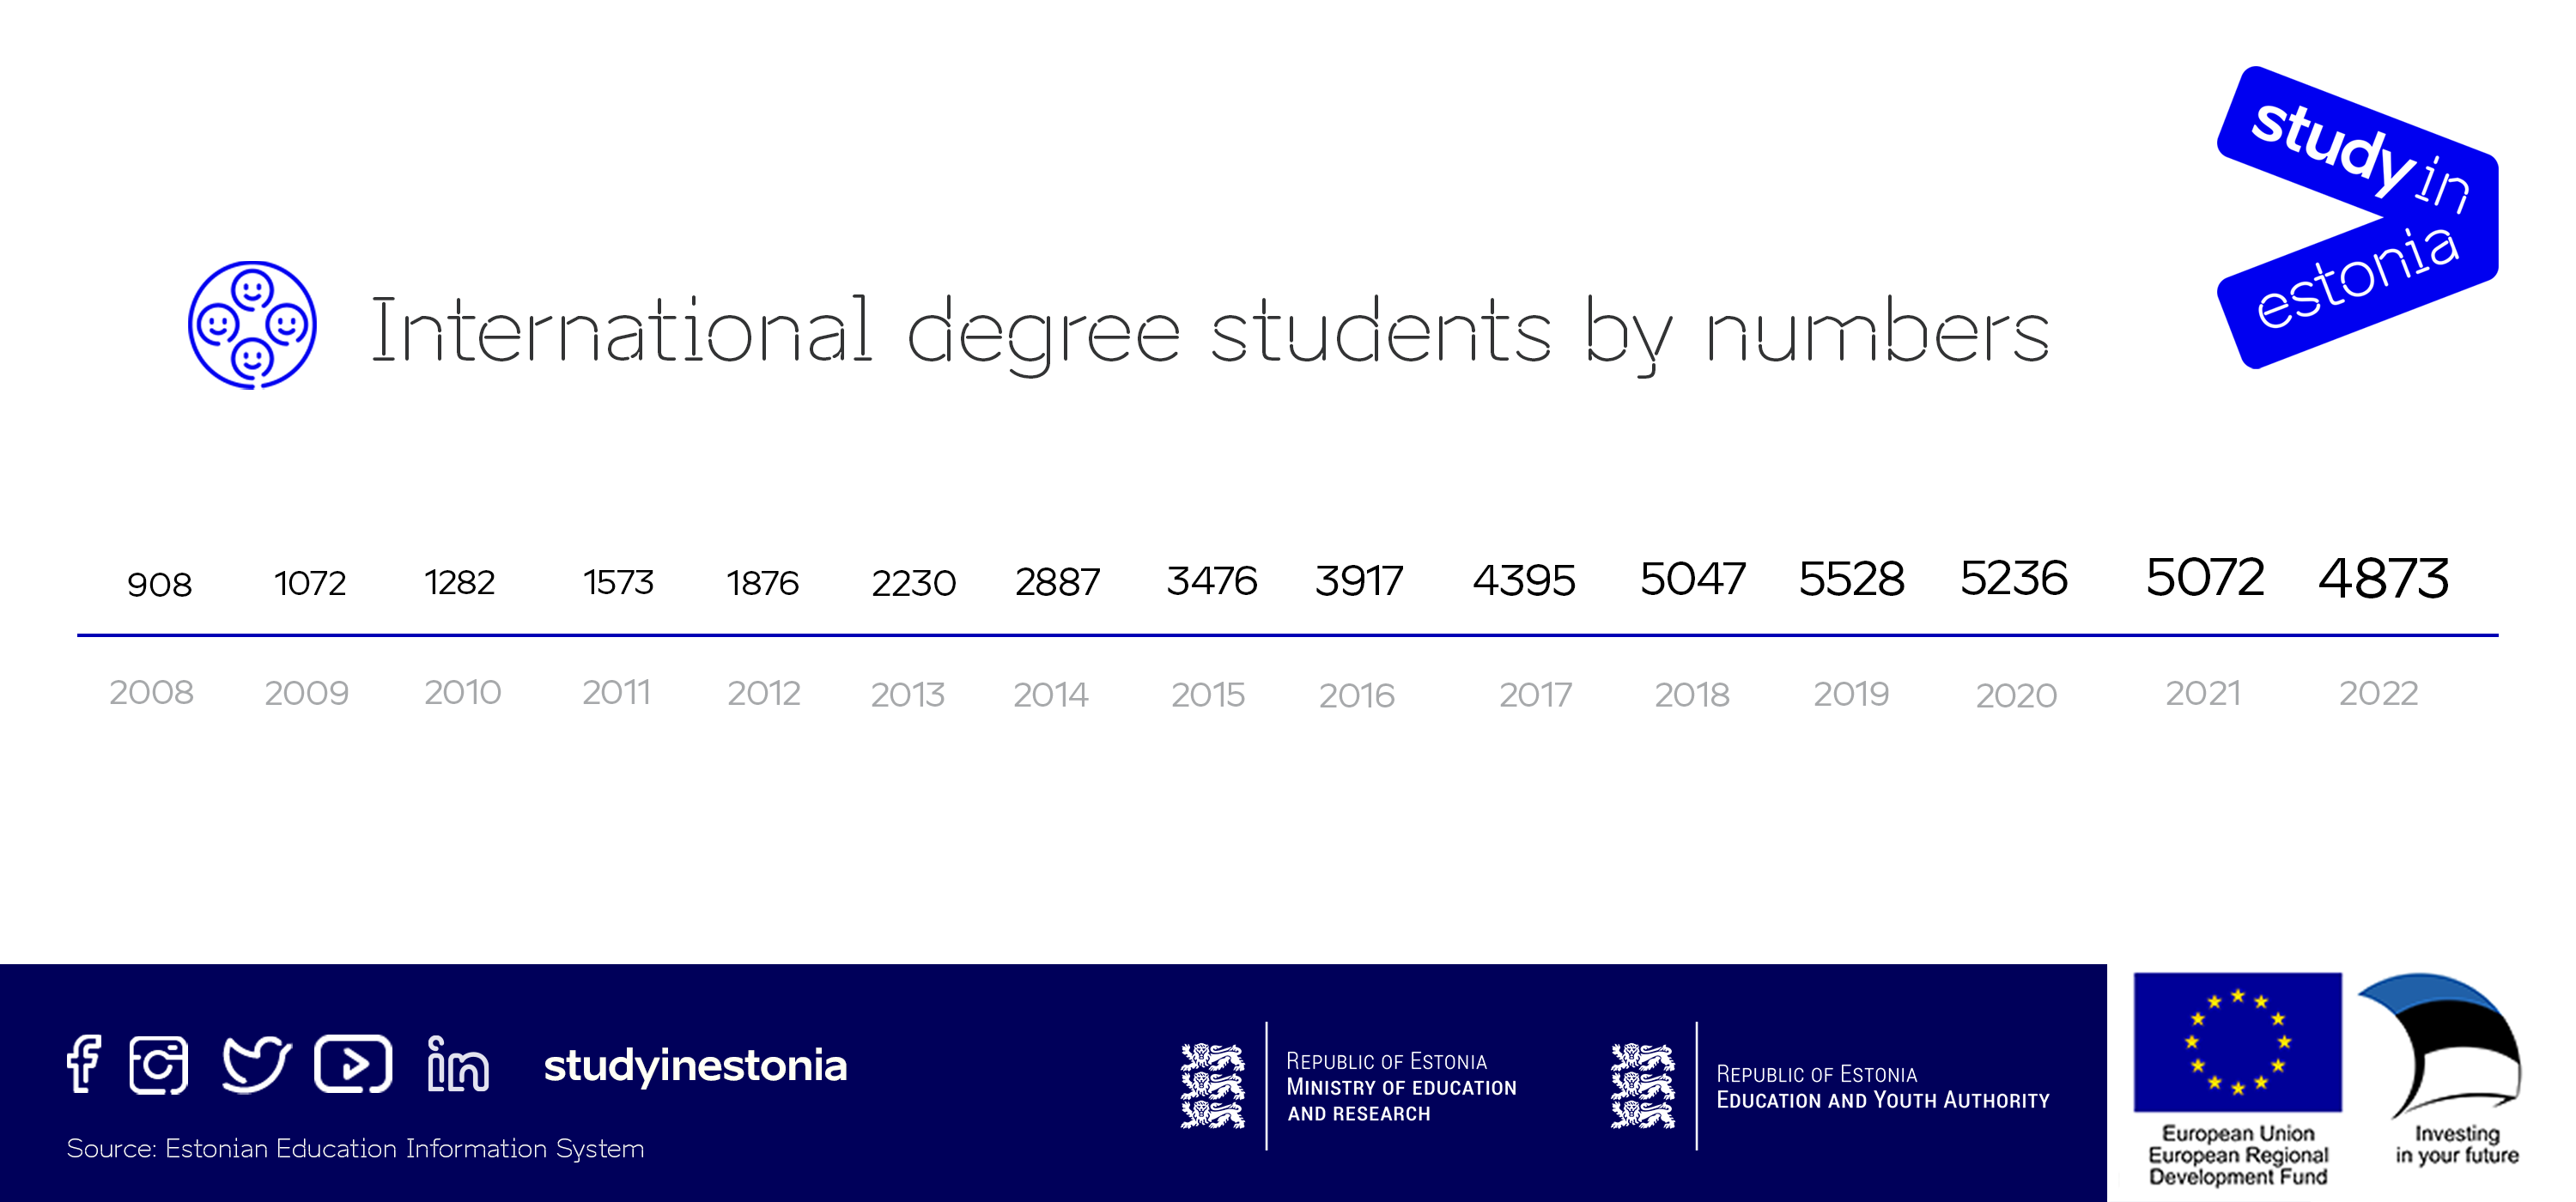 Students by numbers 2022